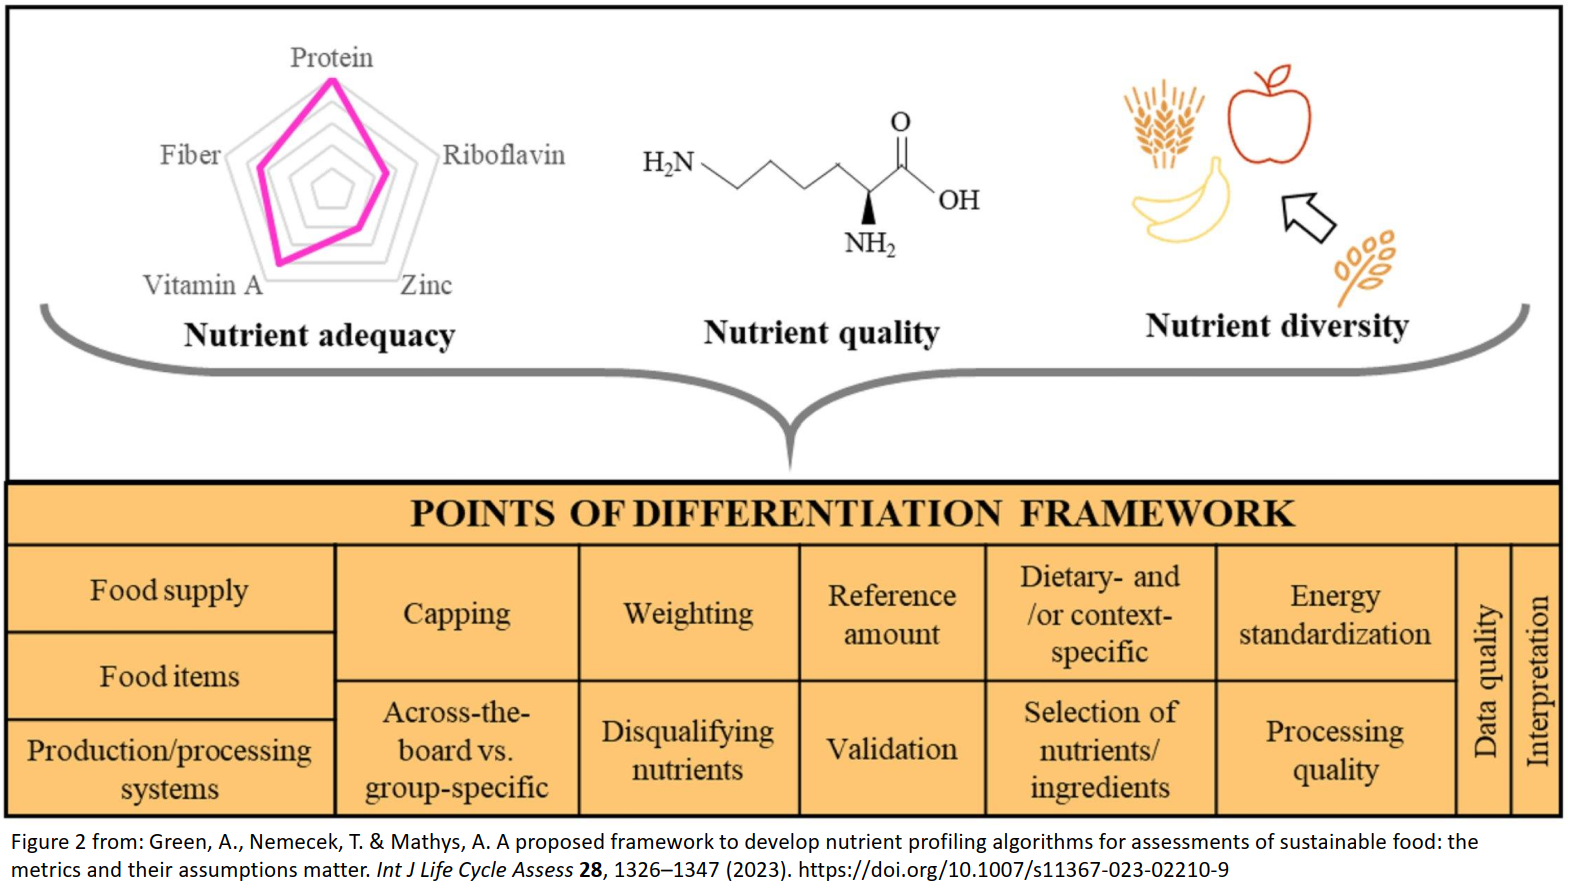 Green, A., Nemecek, T. & Mathys, A. A proposed framework to develop nutrient profiling algorithms for assessments of sustainable food: the metrics and their assumptions matter. Int J Life Cycle Assess 28, 1326–1347 (2023). https://doi.org/10.1007/s11367-023-02210-9